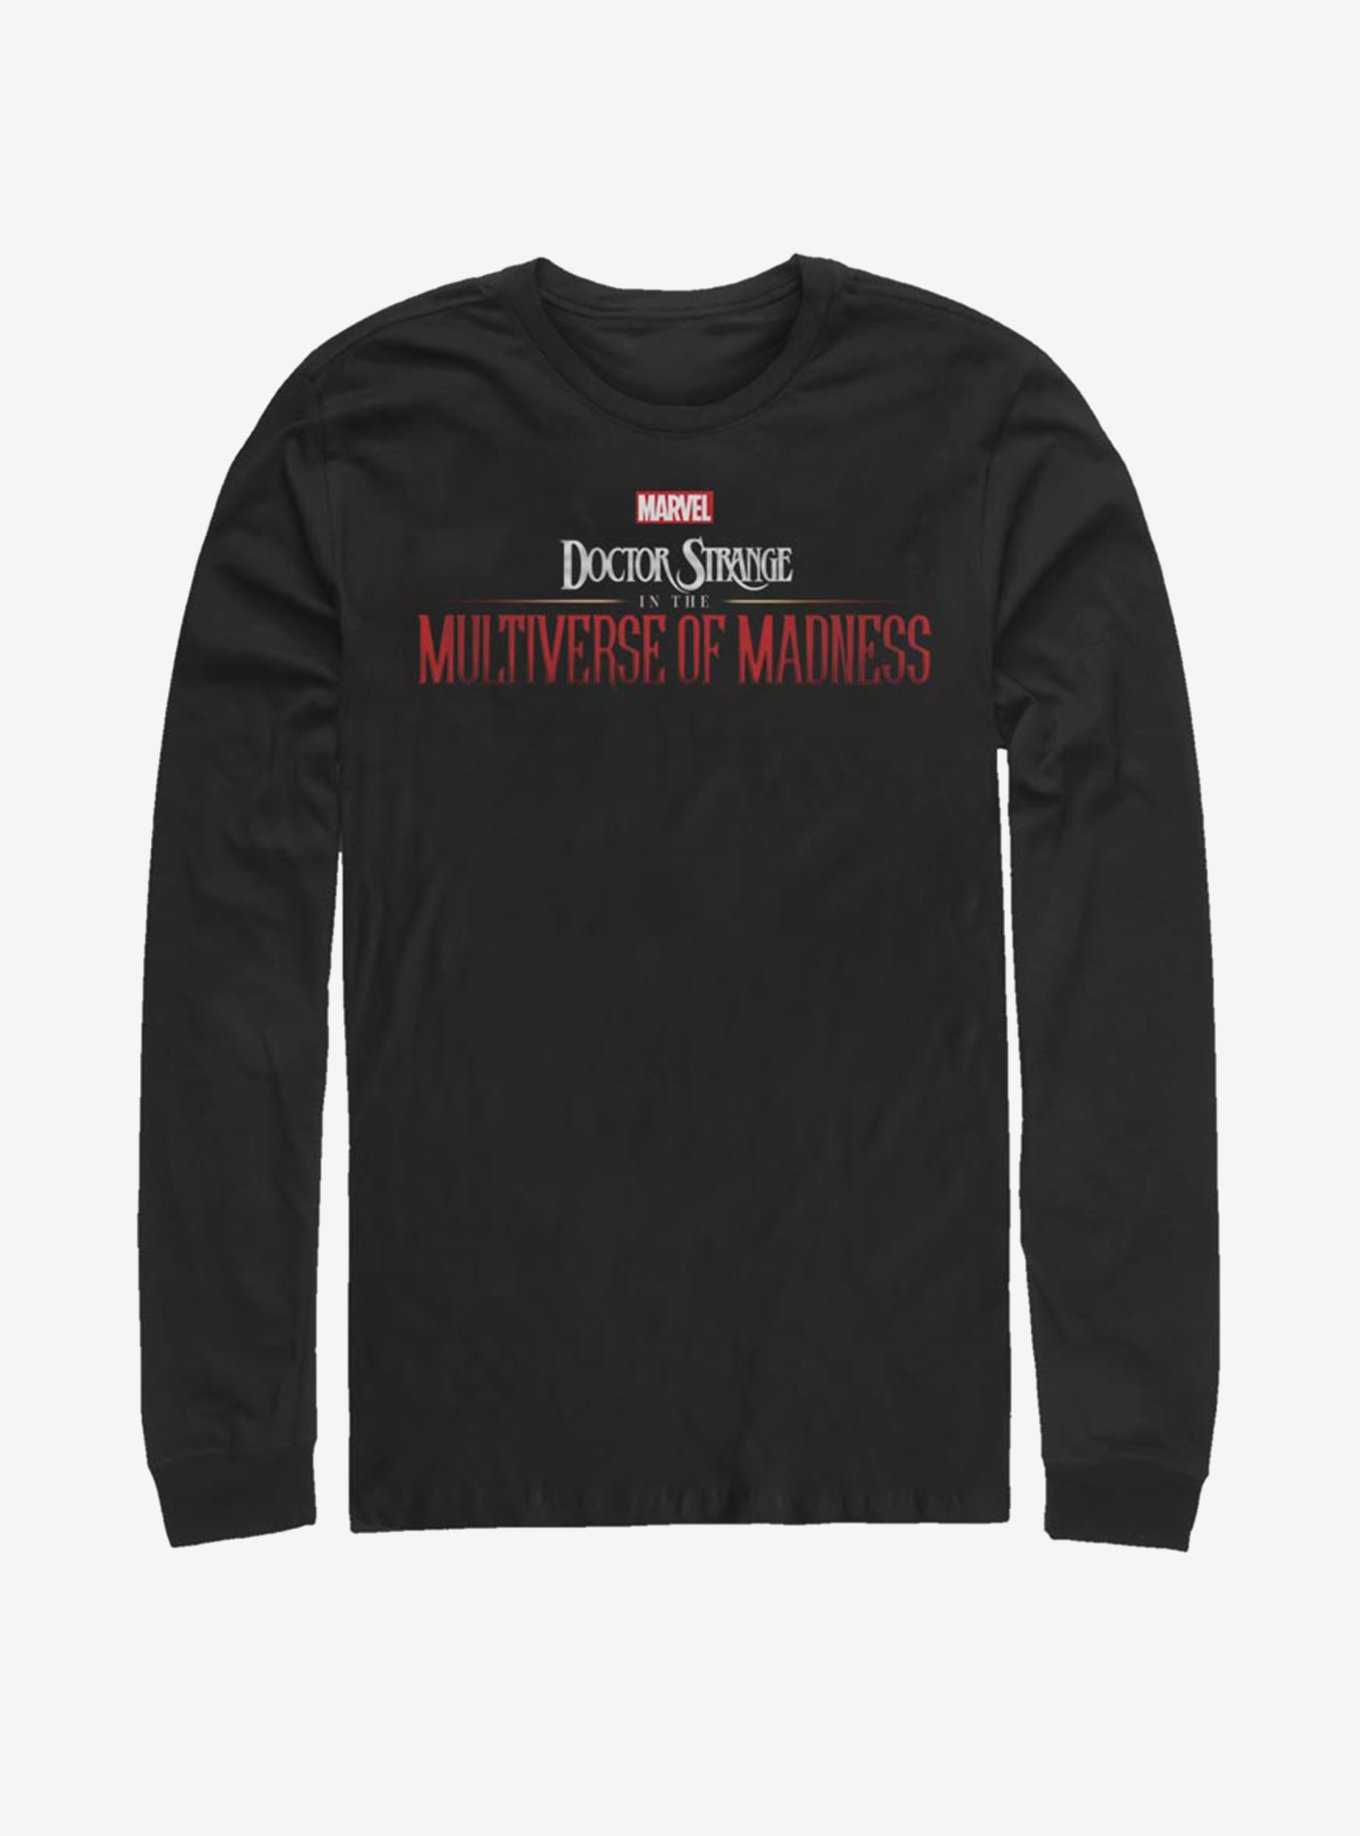 Marvel Doctor Strange In The Multiverse Of Madness Long-Sleeve T-Shirt, , hi-res